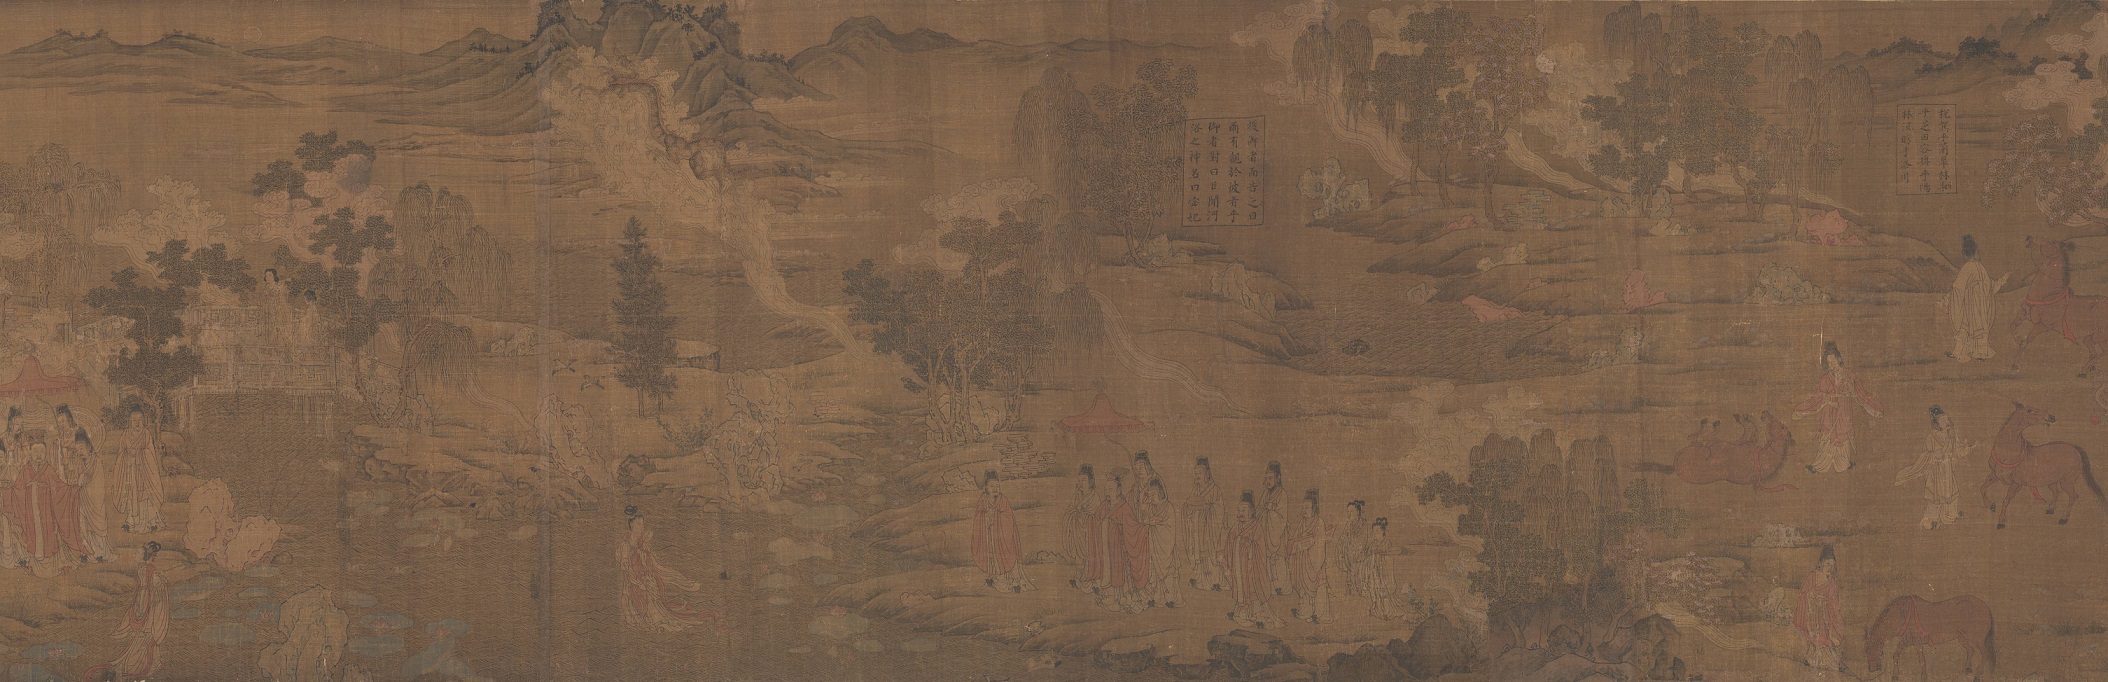 Nymph of the Luo River (Southern Song copy)